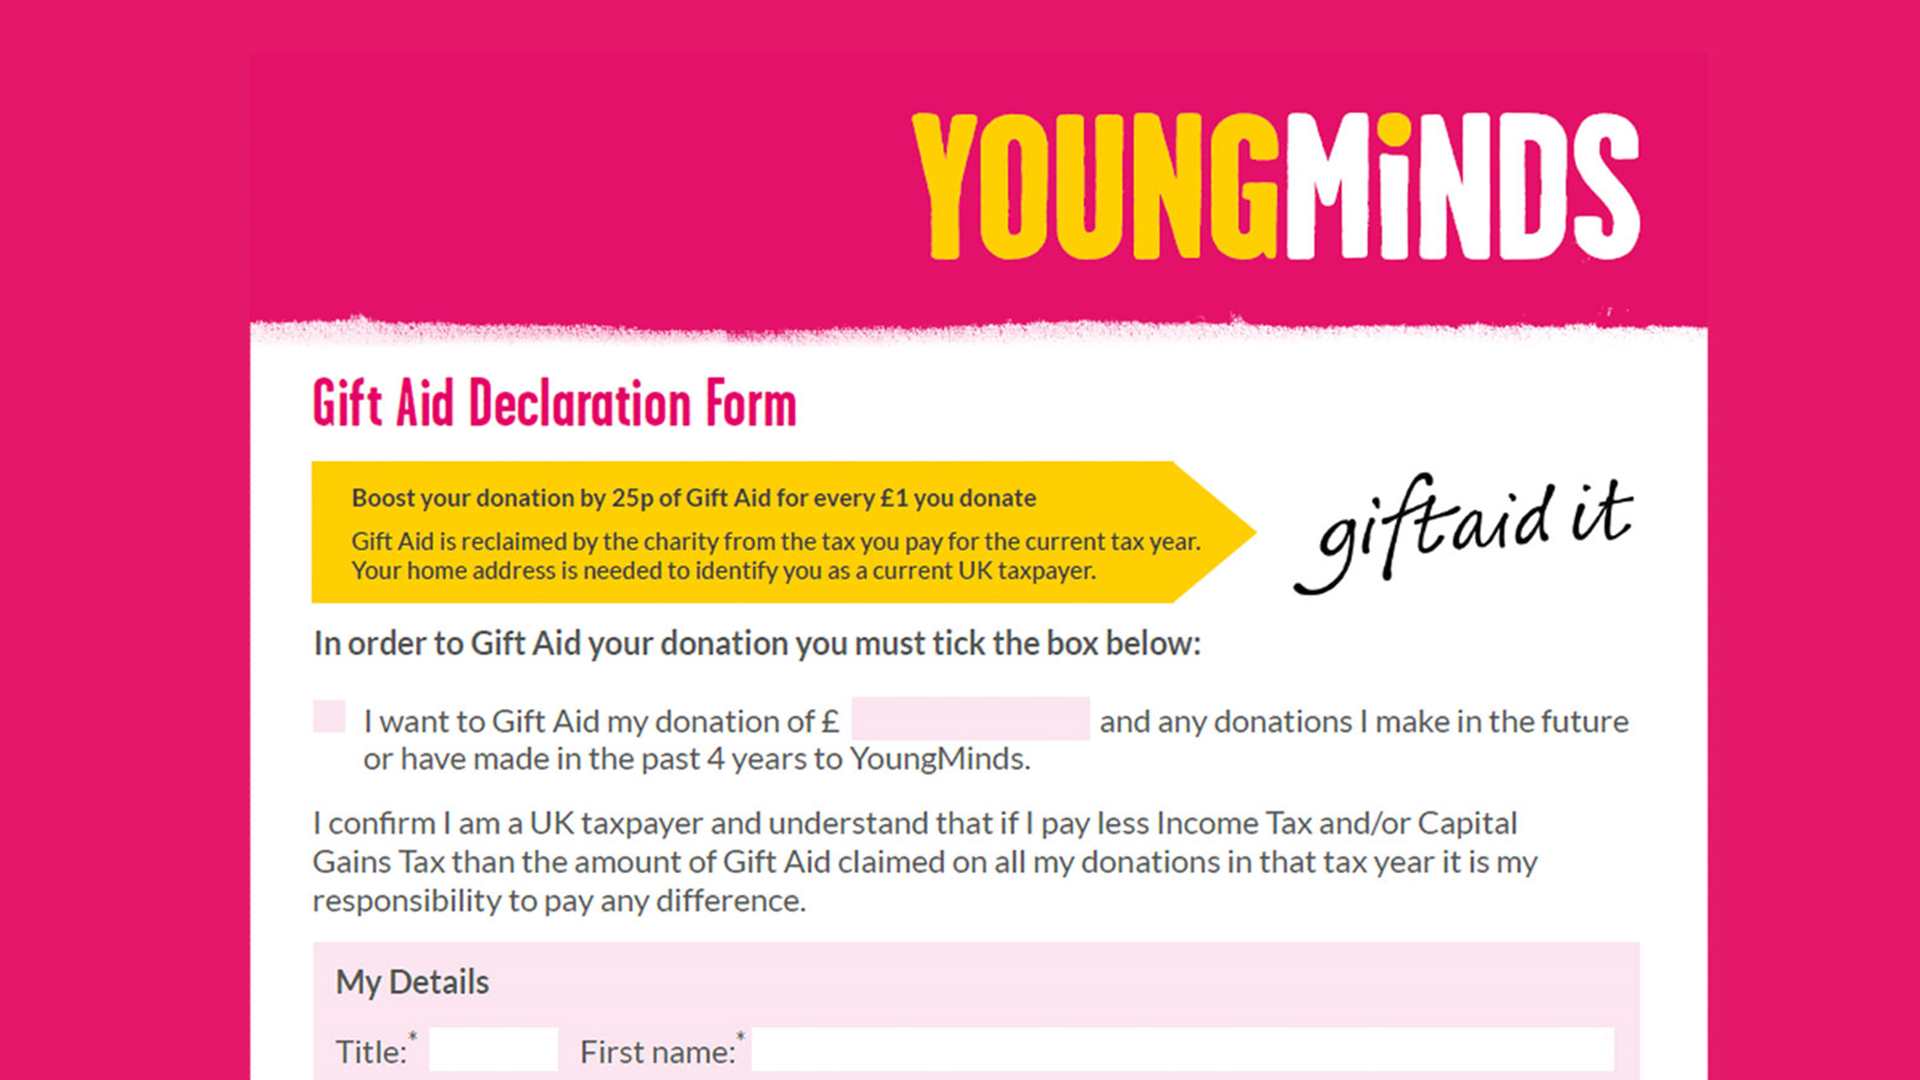 Screenshot of our gift aid declaration form which sits on a pink background.